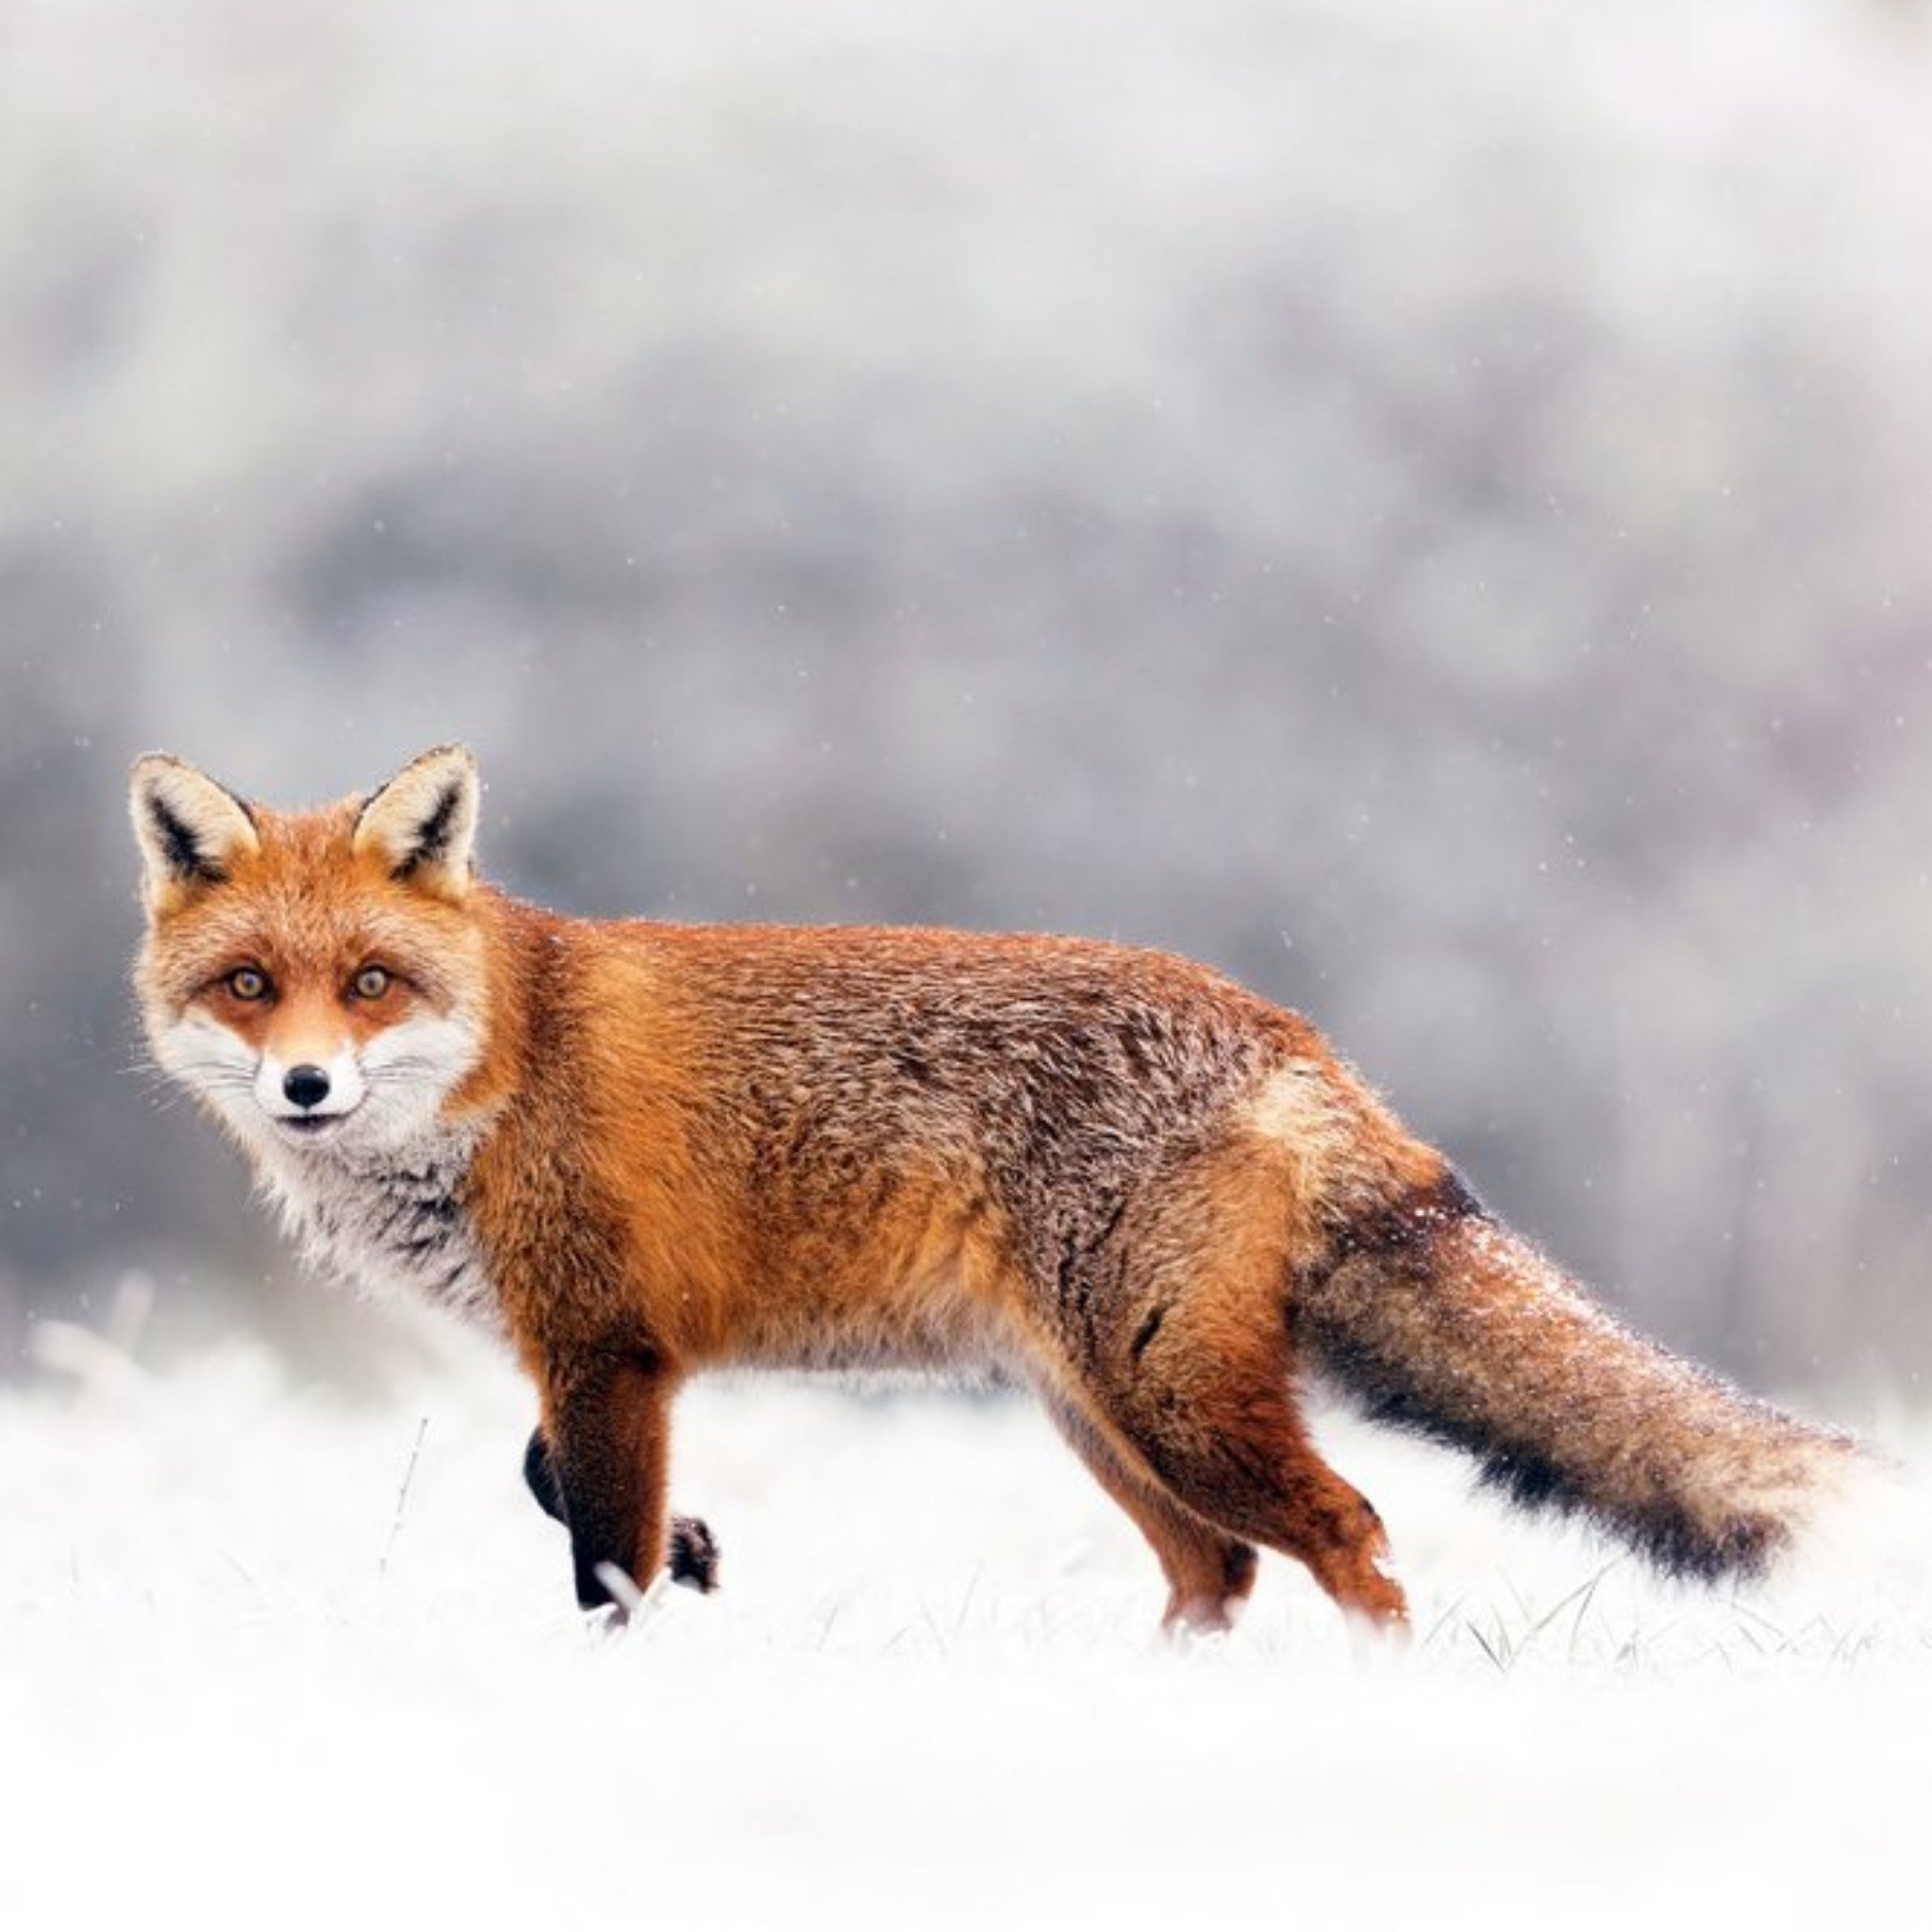 Moonpig Photographic Red Fox Walking On The Snow In Dunleckny, County Carlow, Ireland Just A Note Ca